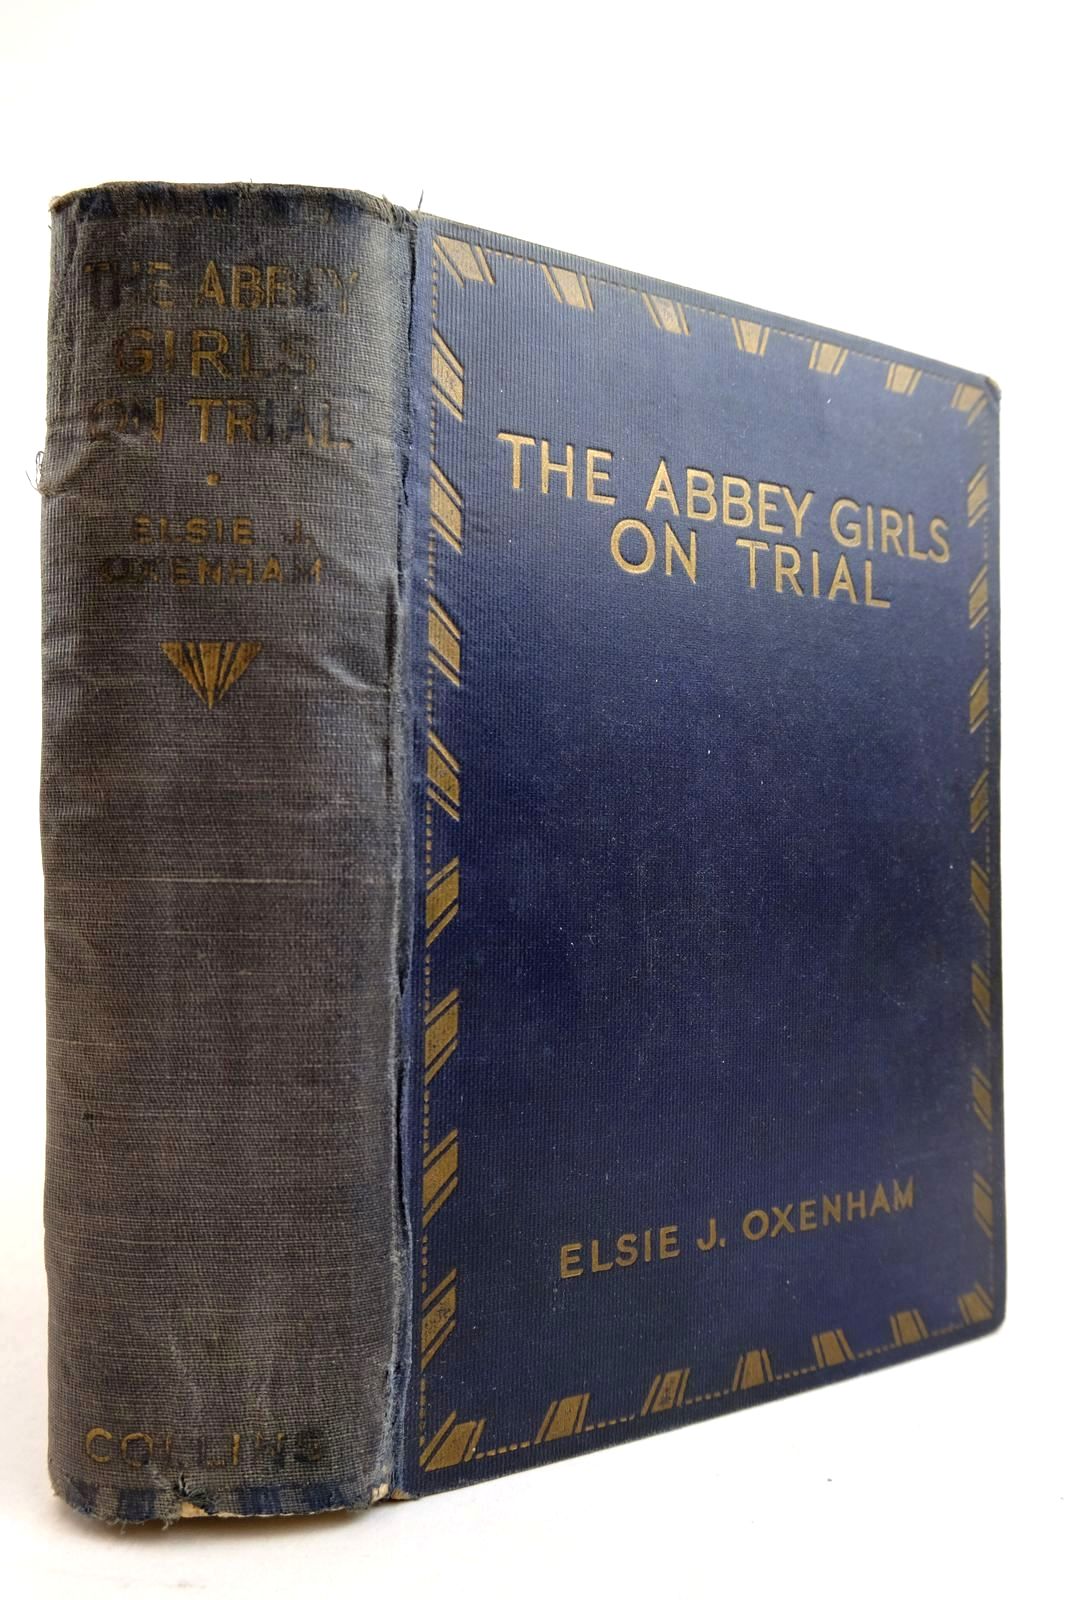 Photo of THE ABBEY GIRLS ON TRIAL- Stock Number: 2134318